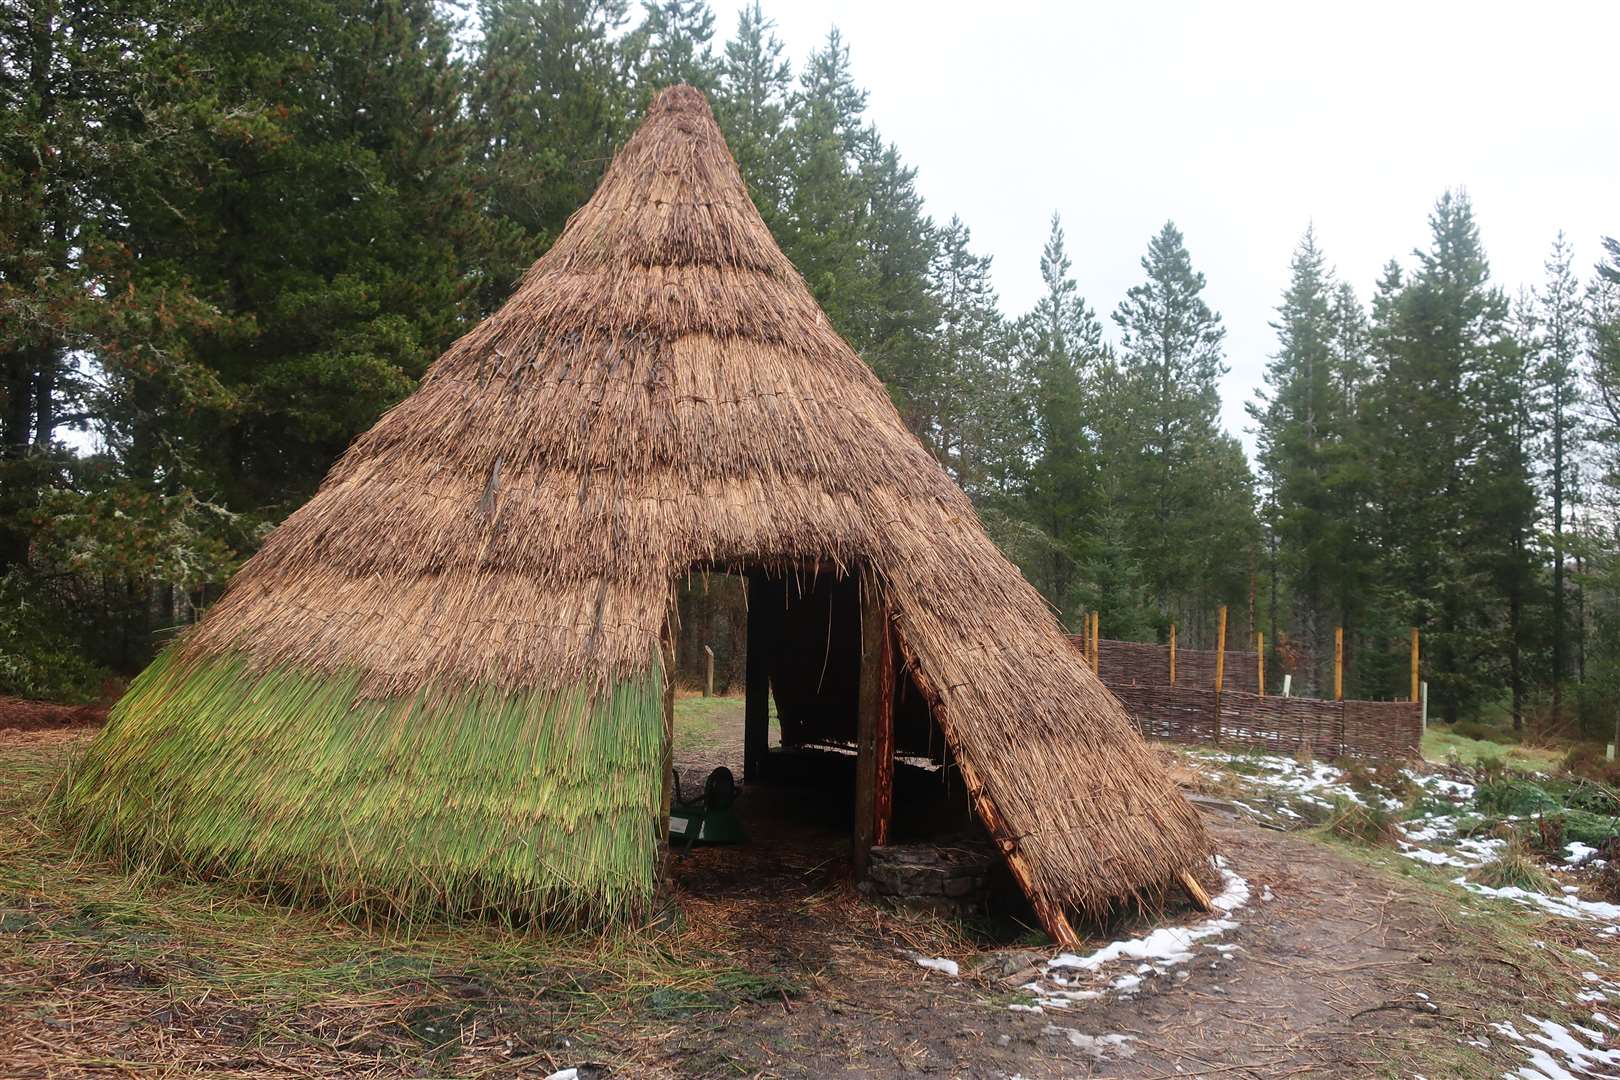 The roundhouse at Abriachan has been rebuilt since it was destroyed by fire.